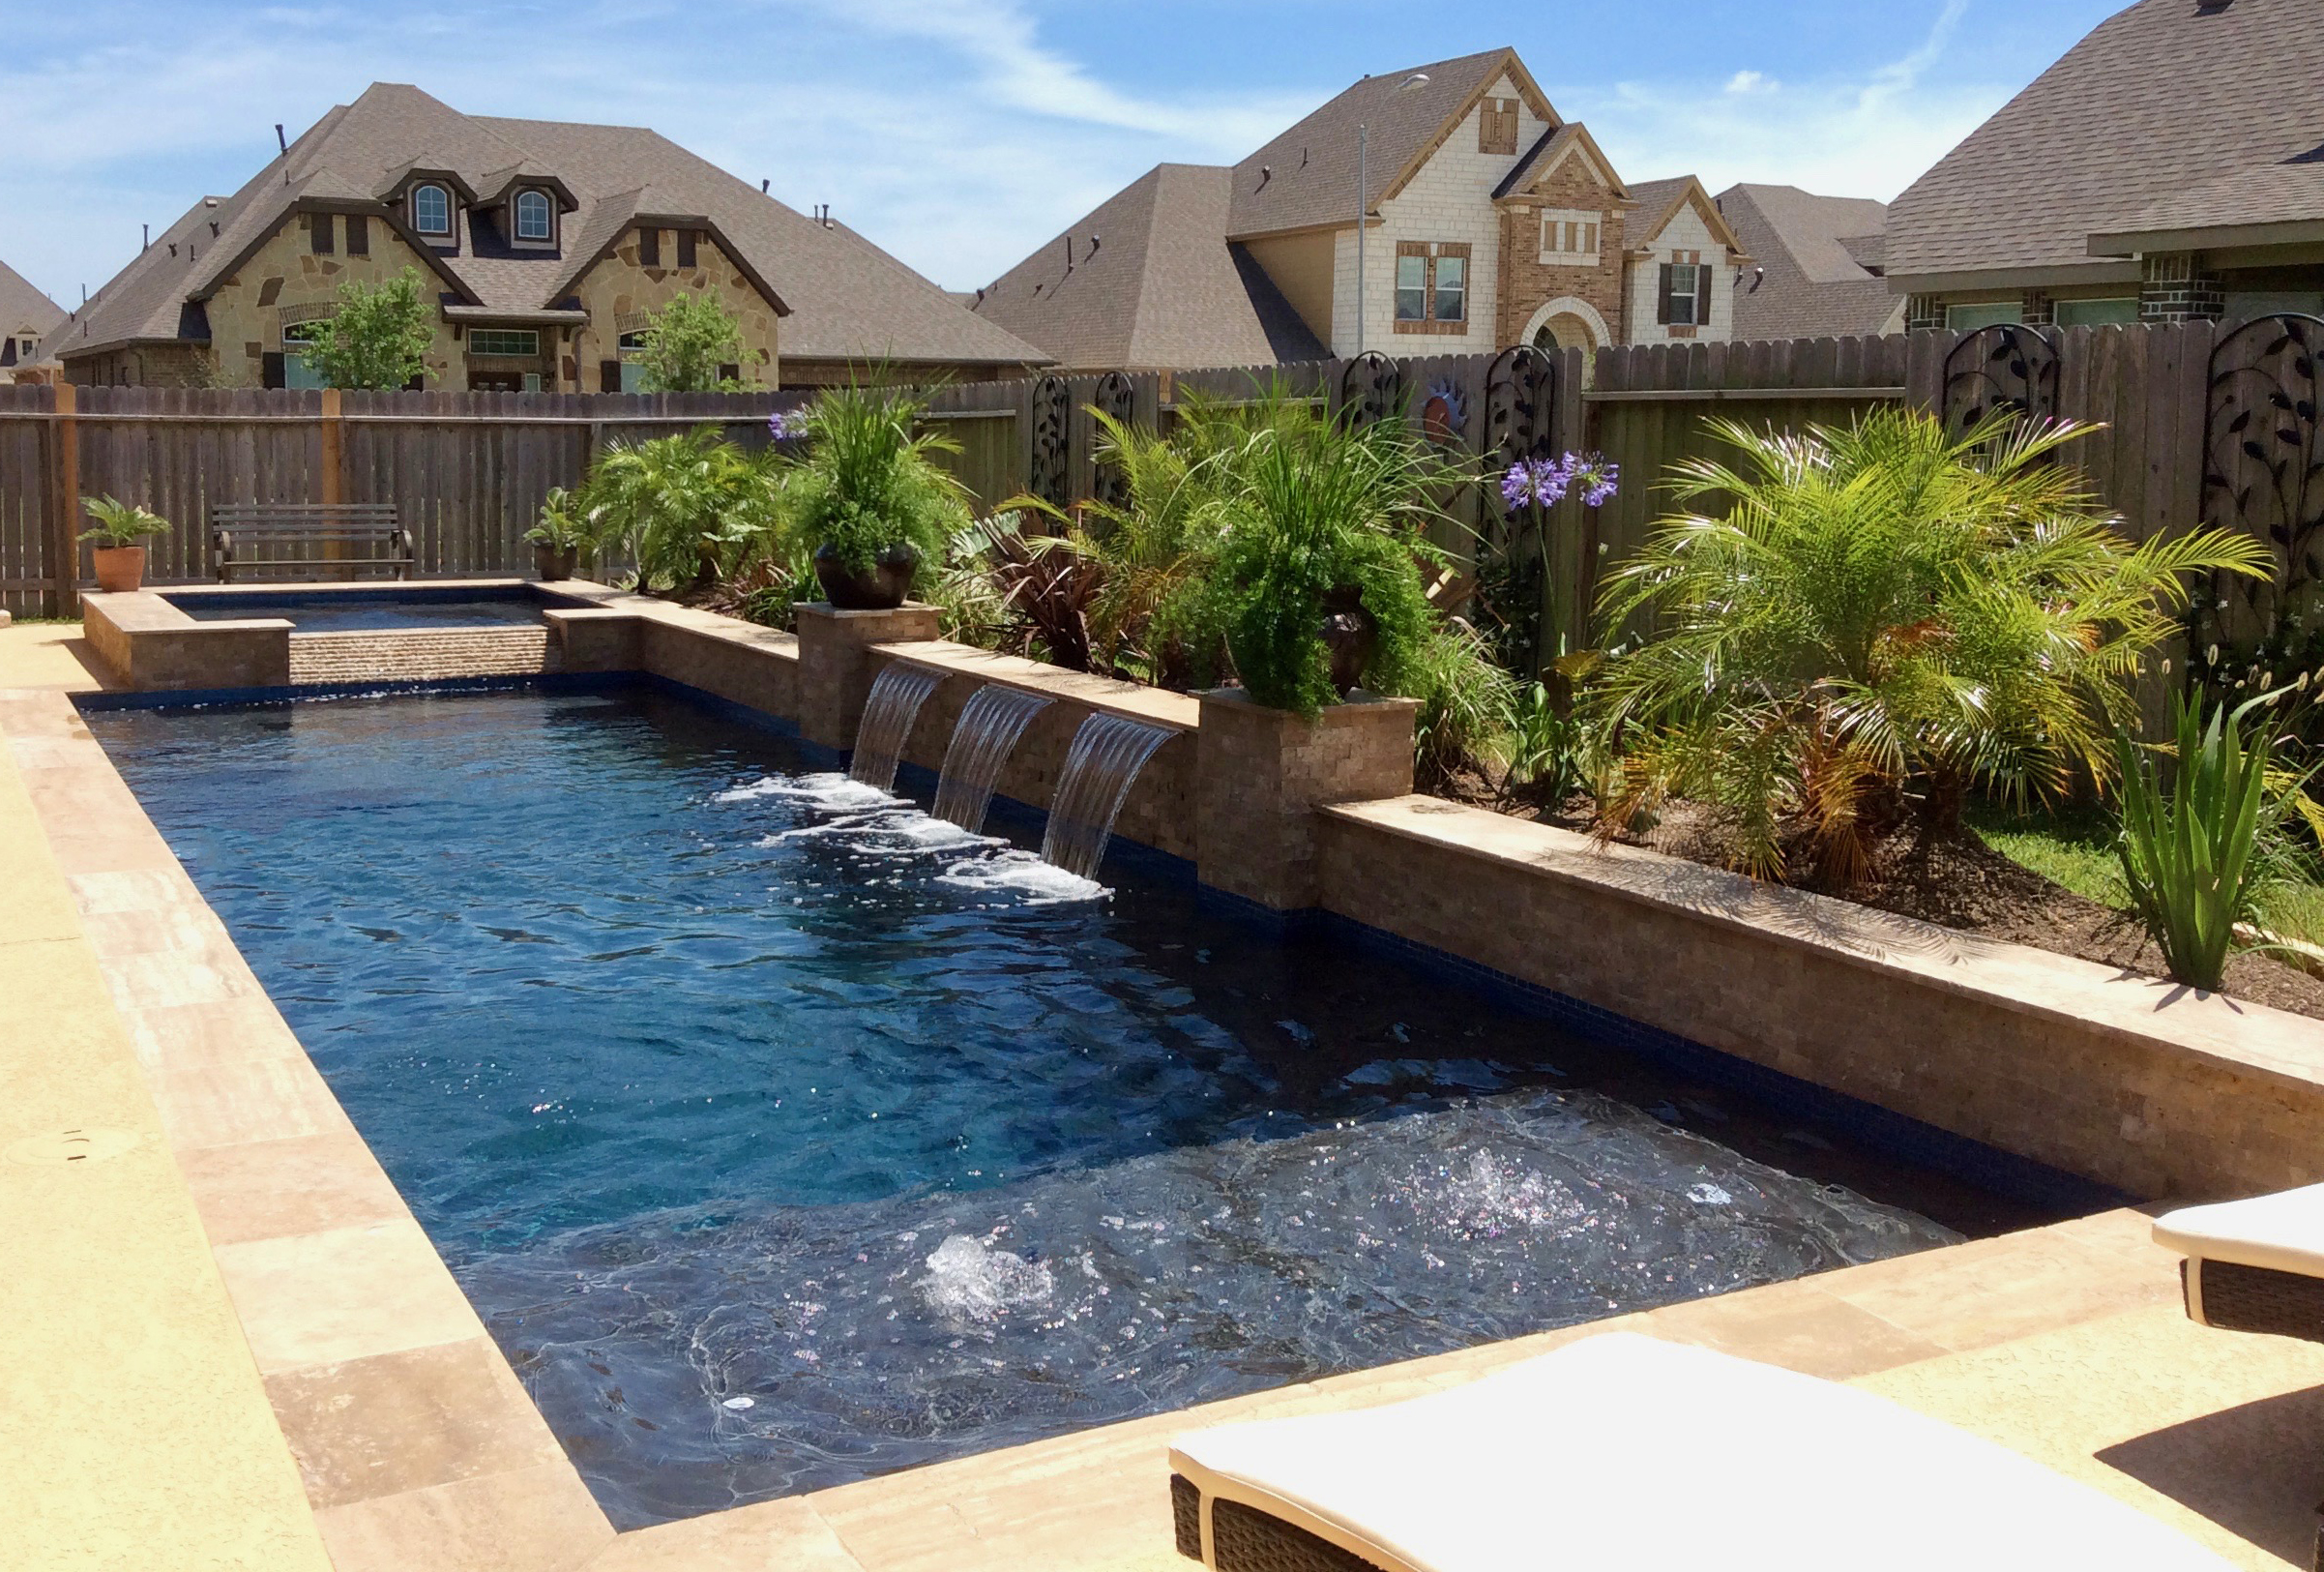 Professional pool design and pool construction from pool builders in Houston